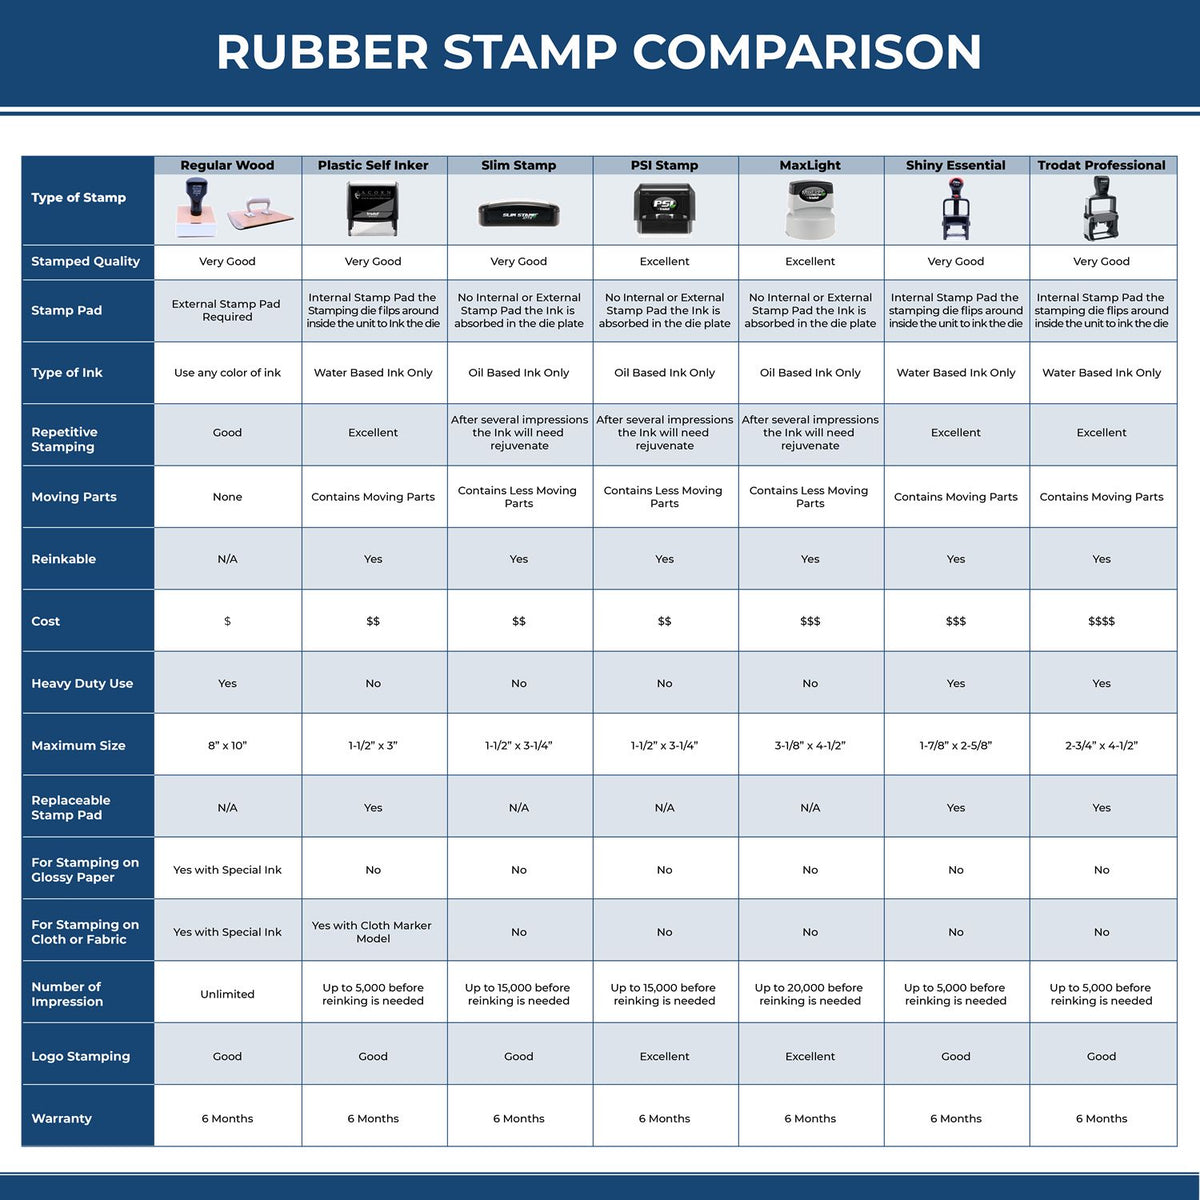 A comparison chart for the different types of mount models available for the Premium MaxLight Pre-Inked Colorado Engineering Stamp.